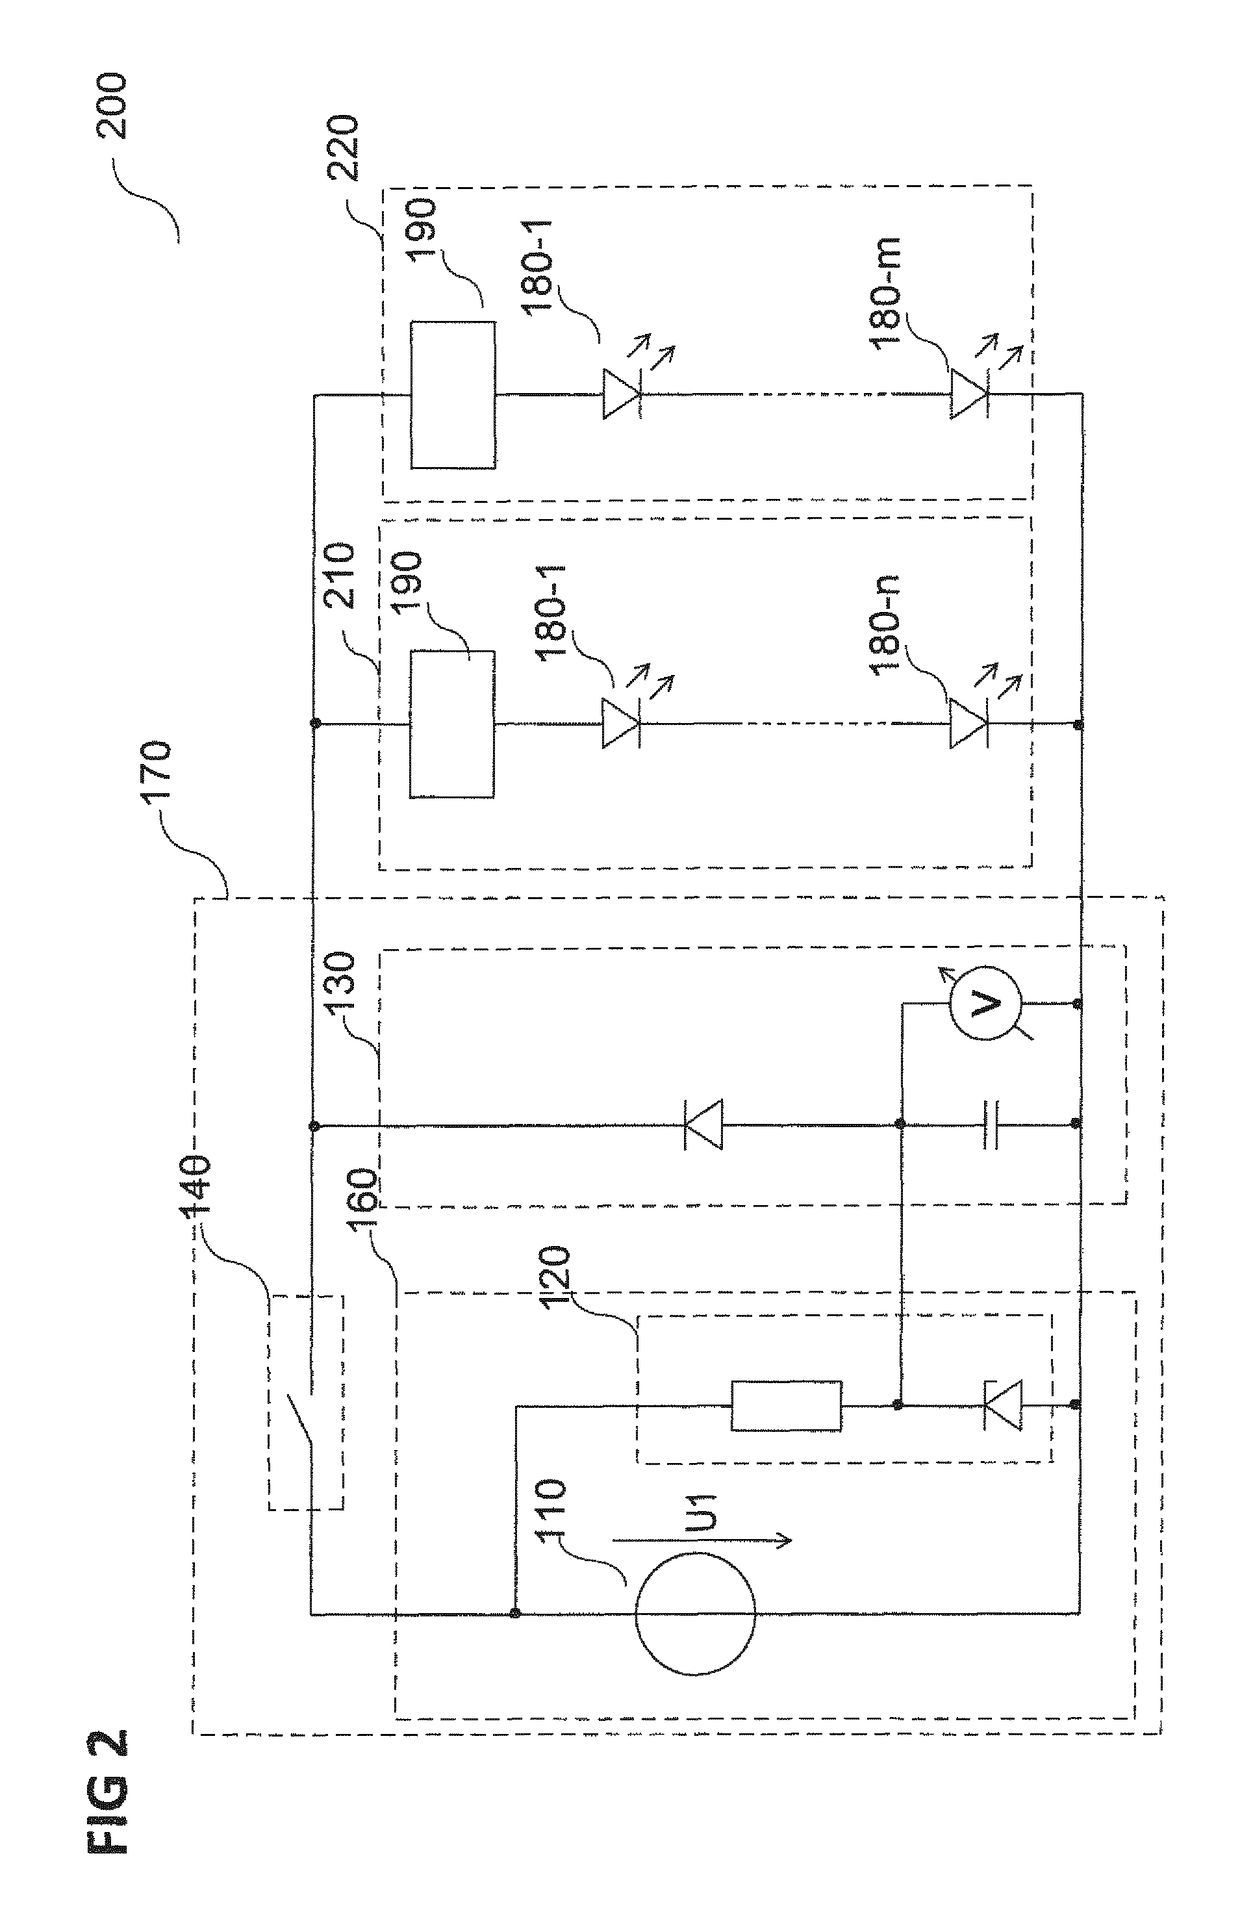 Optoelectronic assembly and method for operating an optoelectronic assembly